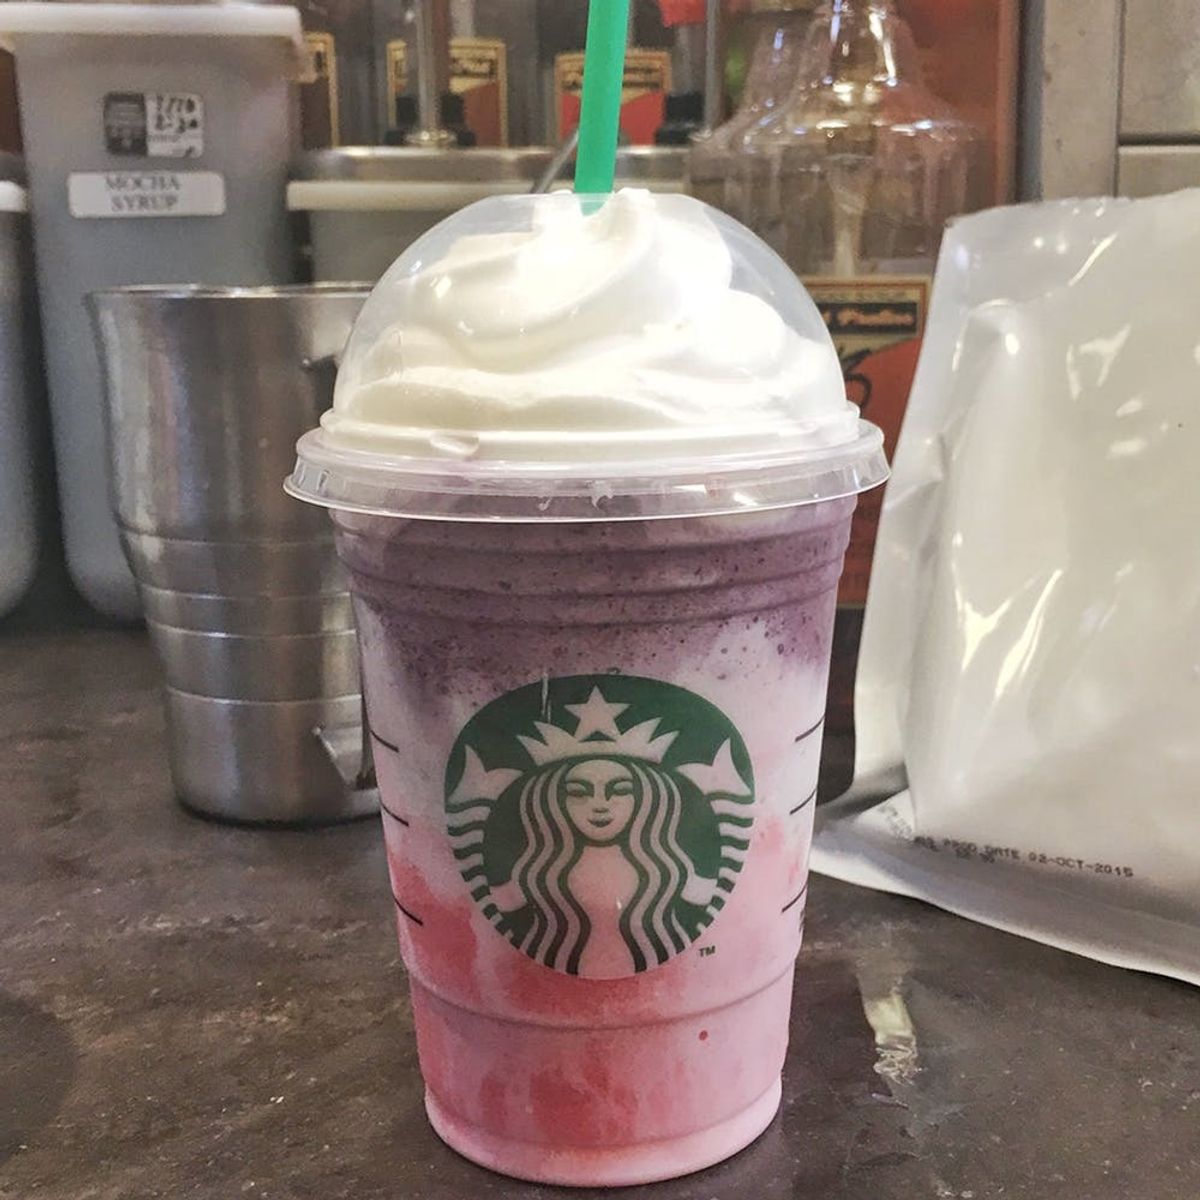 This Is the Secret Valentine’s Day Starbucks Menu You Need to Know About